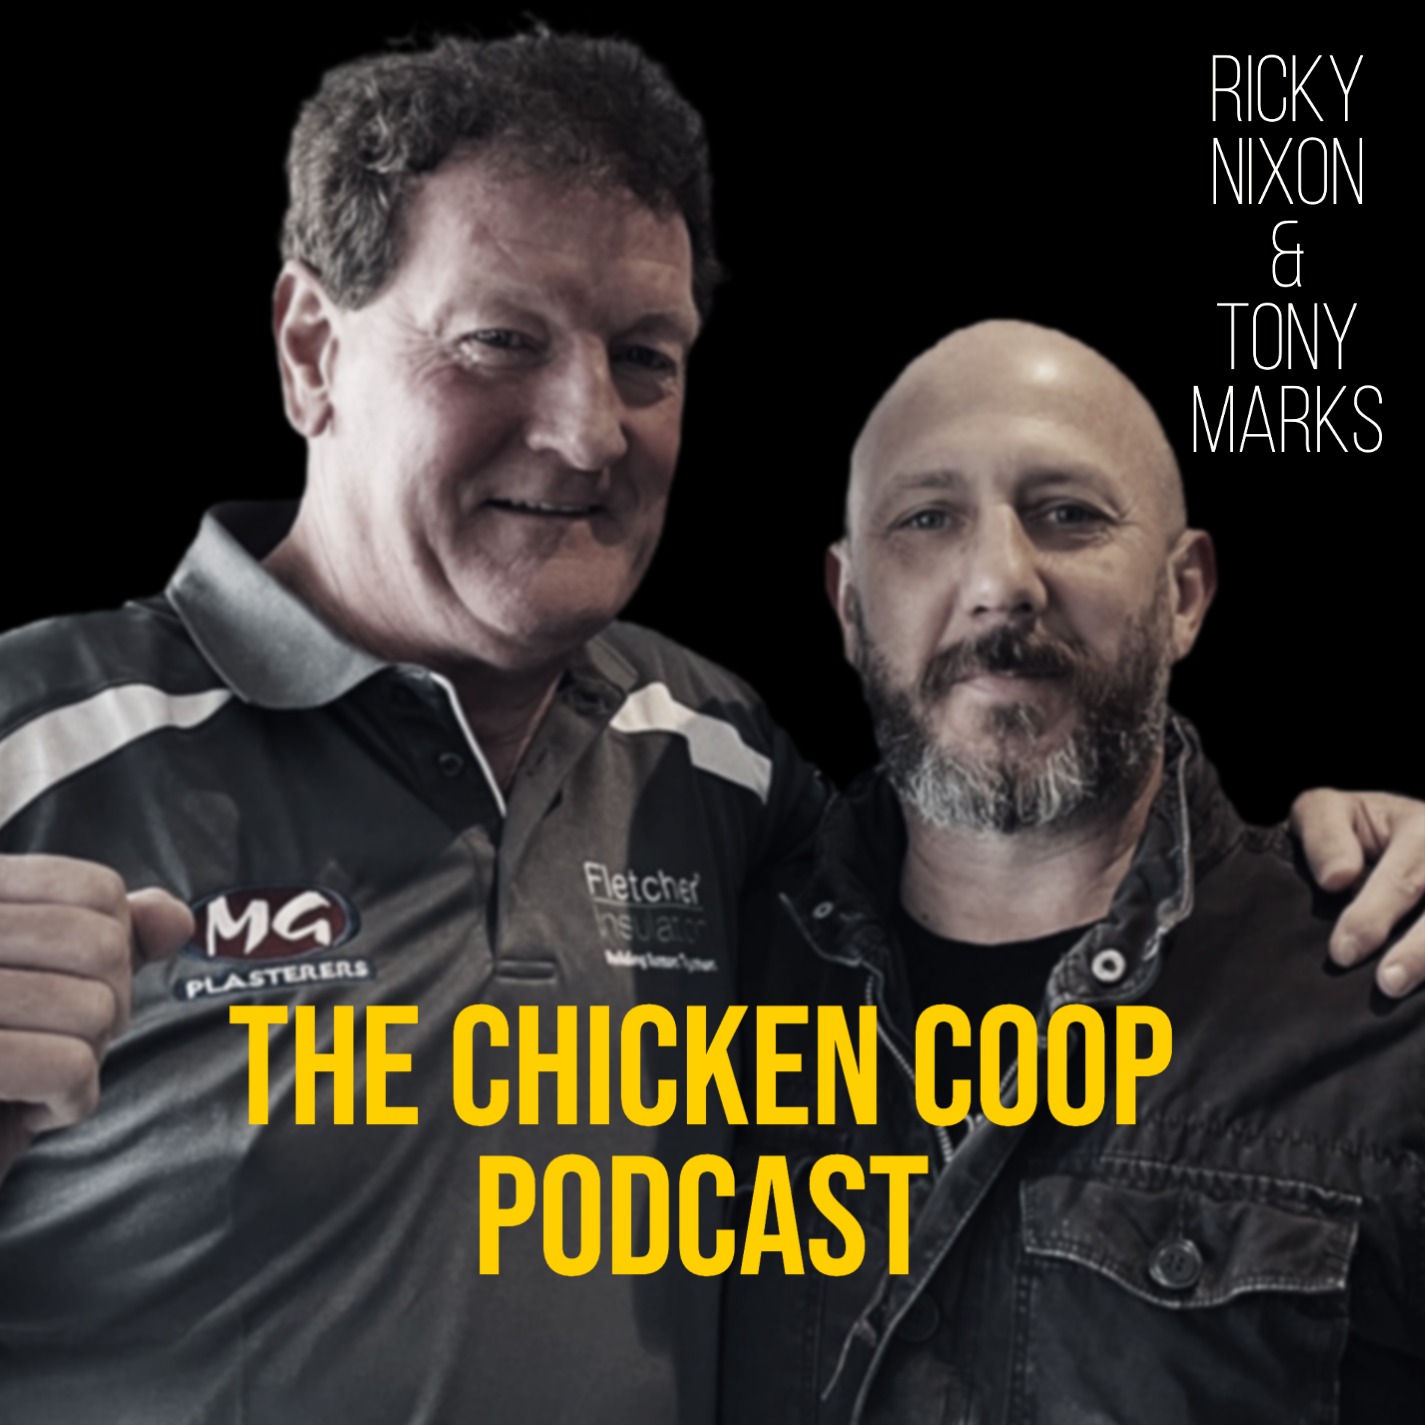 The Chicken Coop with Ricky Nixon & Tony Marks - Episode 6